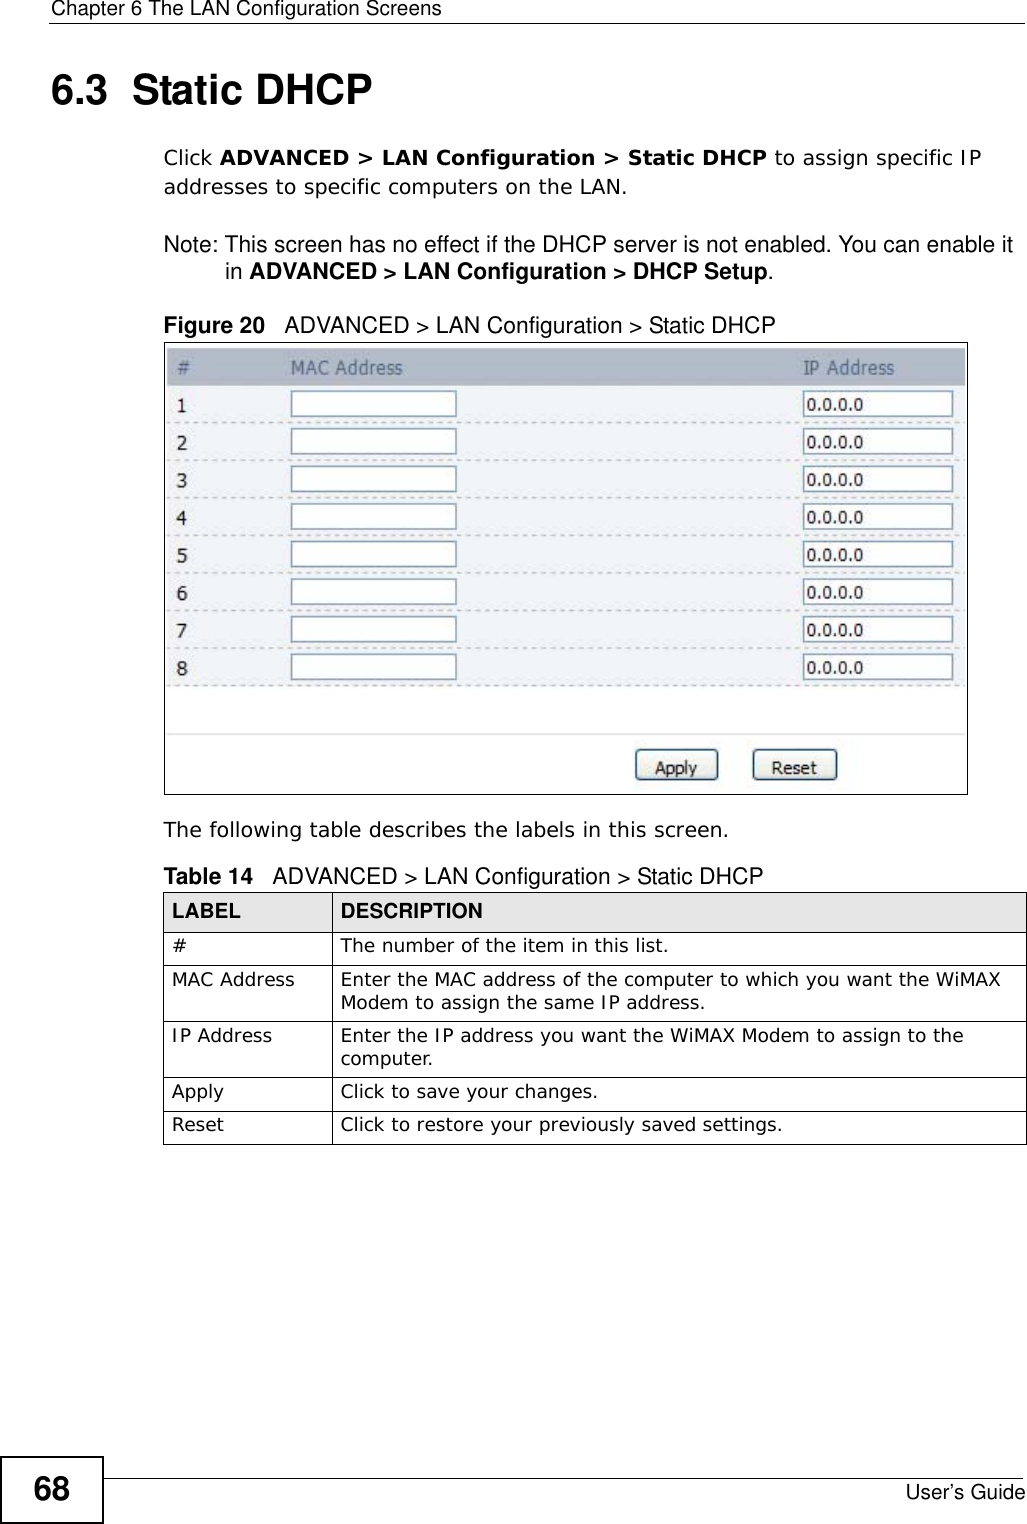 Chapter 6 The LAN Configuration ScreensUser’s Guide686.3  Static DHCPClick ADVANCED &gt; LAN Configuration &gt; Static DHCP to assign specific IP addresses to specific computers on the LAN.Note: This screen has no effect if the DHCP server is not enabled. You can enable it in ADVANCED &gt; LAN Configuration &gt; DHCP Setup.Figure 20   ADVANCED &gt; LAN Configuration &gt; Static DHCPThe following table describes the labels in this screen. Table 14   ADVANCED &gt; LAN Configuration &gt; Static DHCPLABEL DESCRIPTION# The number of the item in this list.MAC Address Enter the MAC address of the computer to which you want the WiMAX Modem to assign the same IP address.IP Address Enter the IP address you want the WiMAX Modem to assign to the computer.Apply Click to save your changes.Reset Click to restore your previously saved settings.